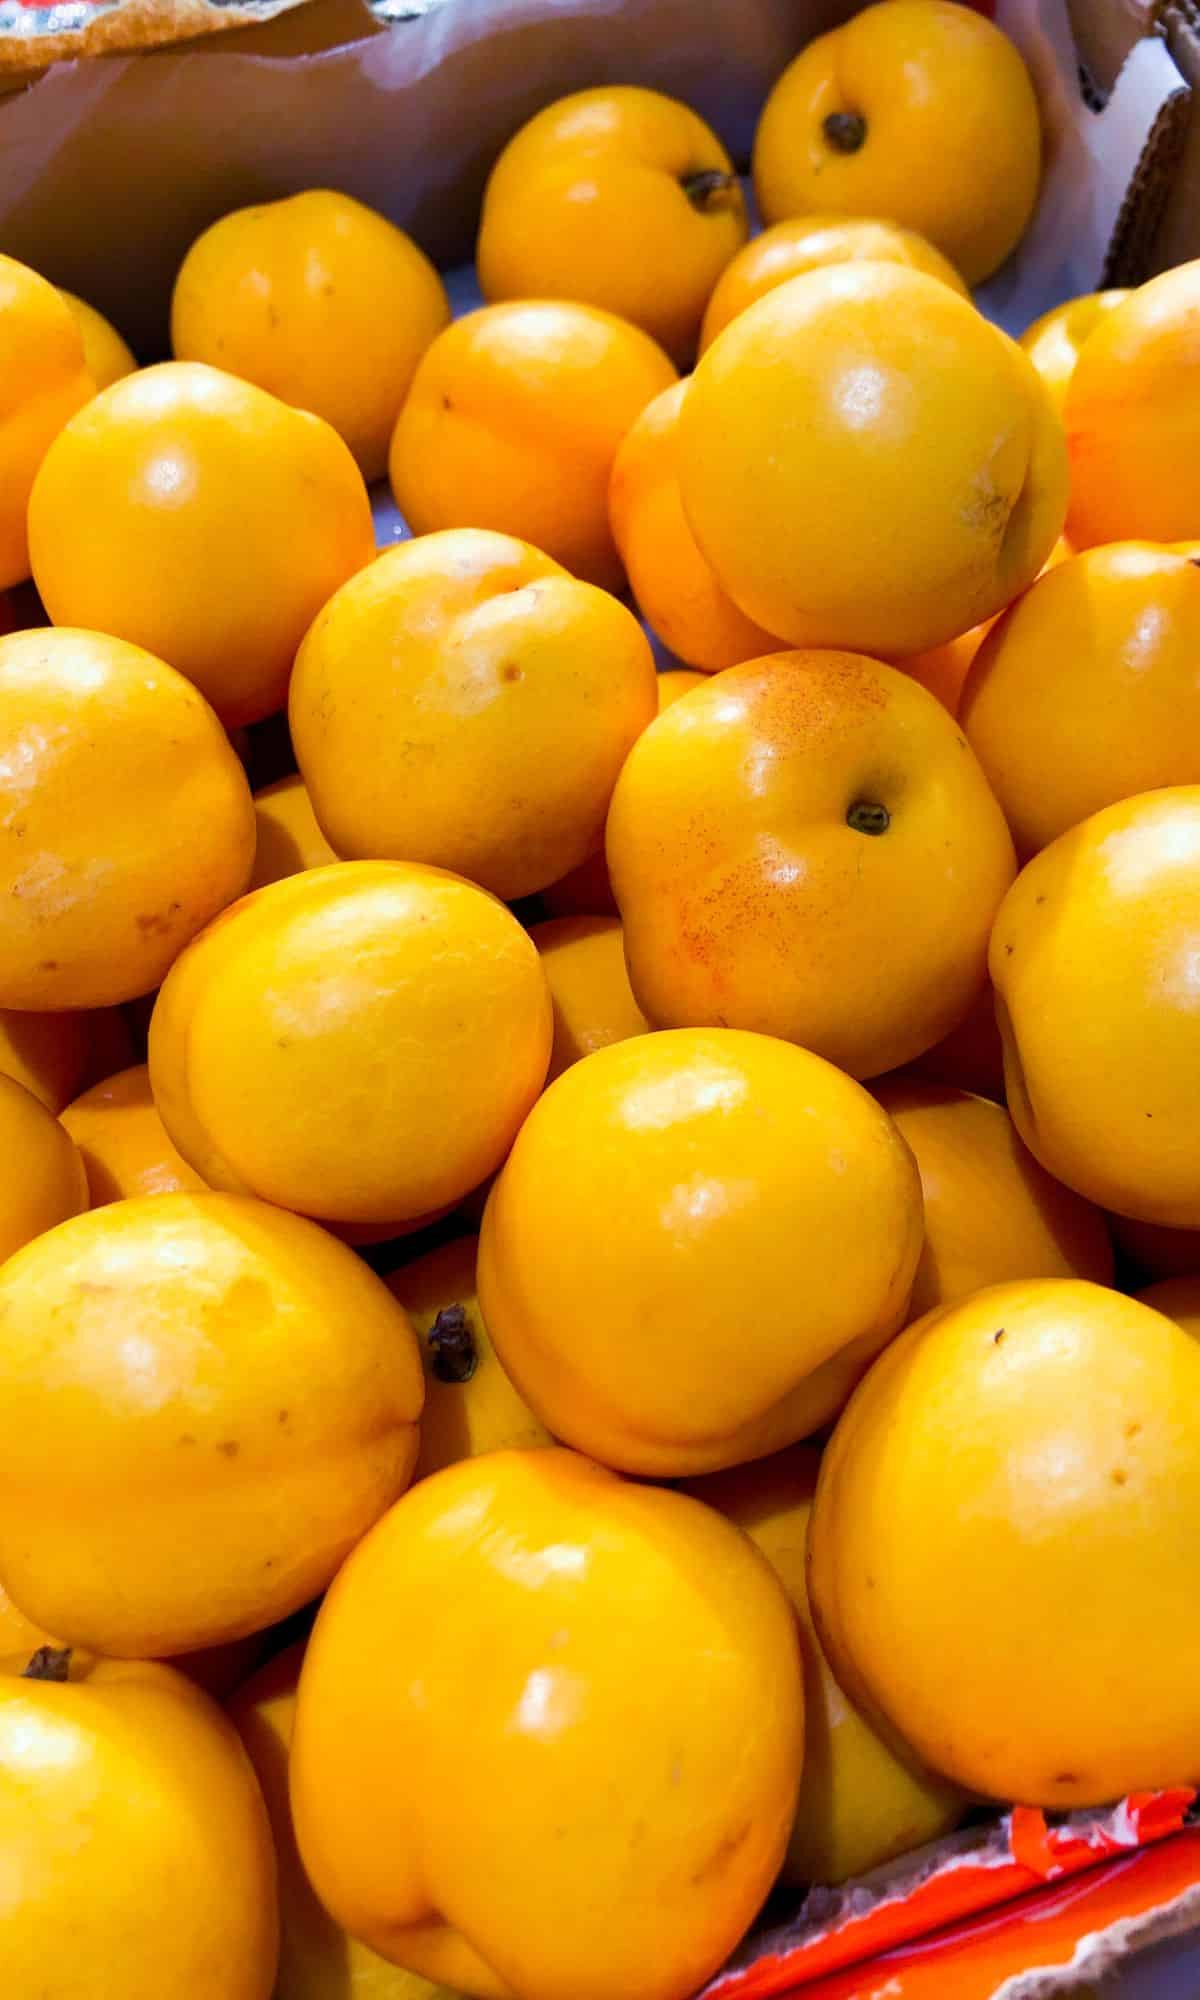 A bunch of orange Nectacot fruits in a pile.